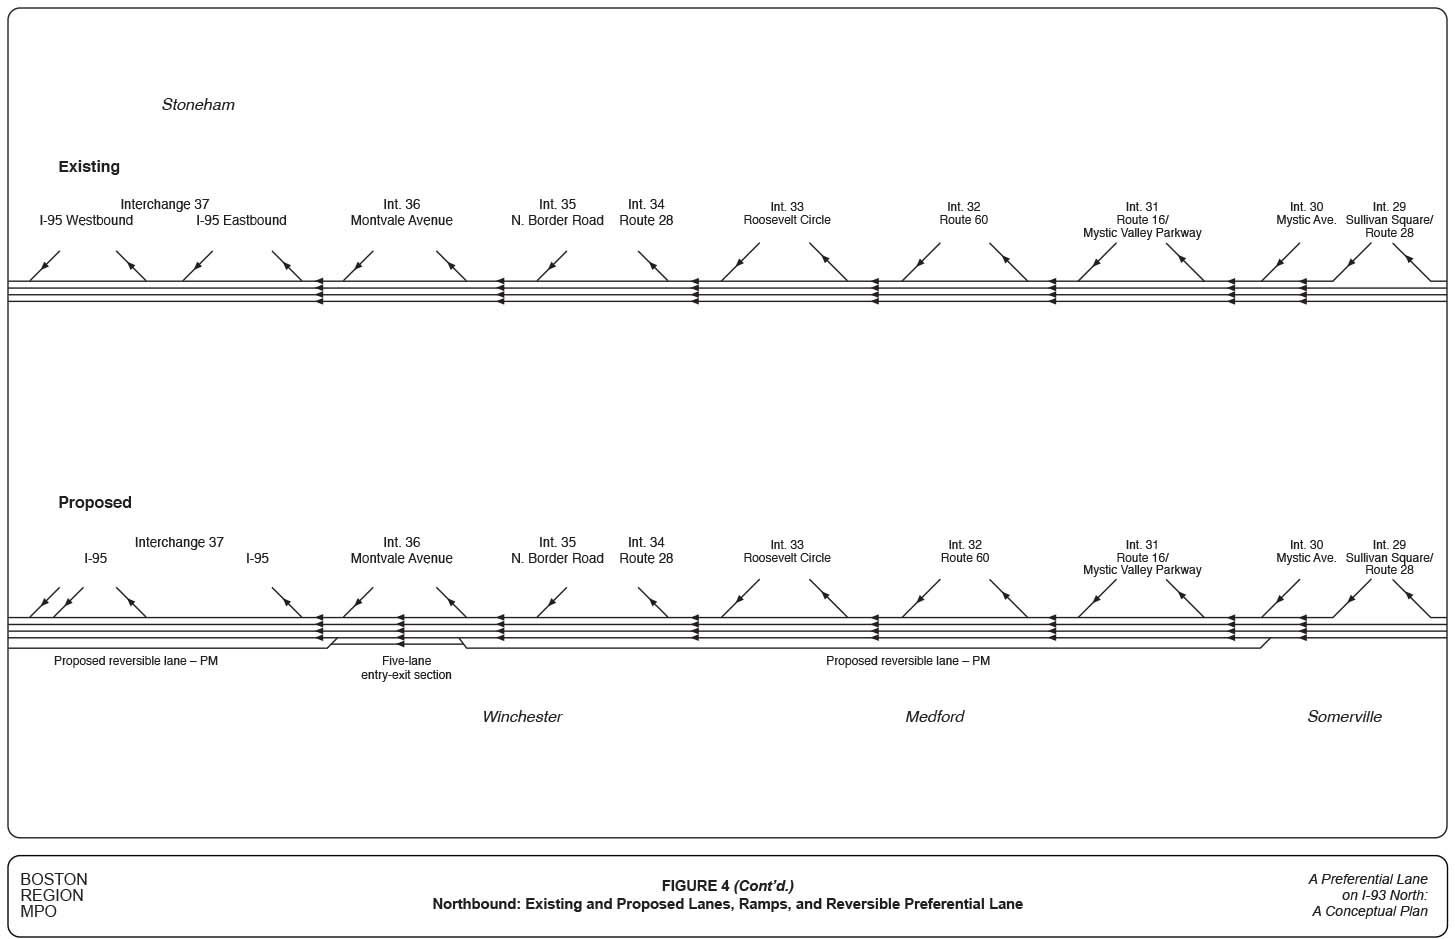 FIGURE 4. Northbound: Existing and Proposed Lanes, Ramps, and Reversible Preferential Lane
Figure 4 presents the proposed preferential lane system in schematic format, which shows existing and proposed northbound lanes and ramps as they would be utilized during the PM peak period. 
